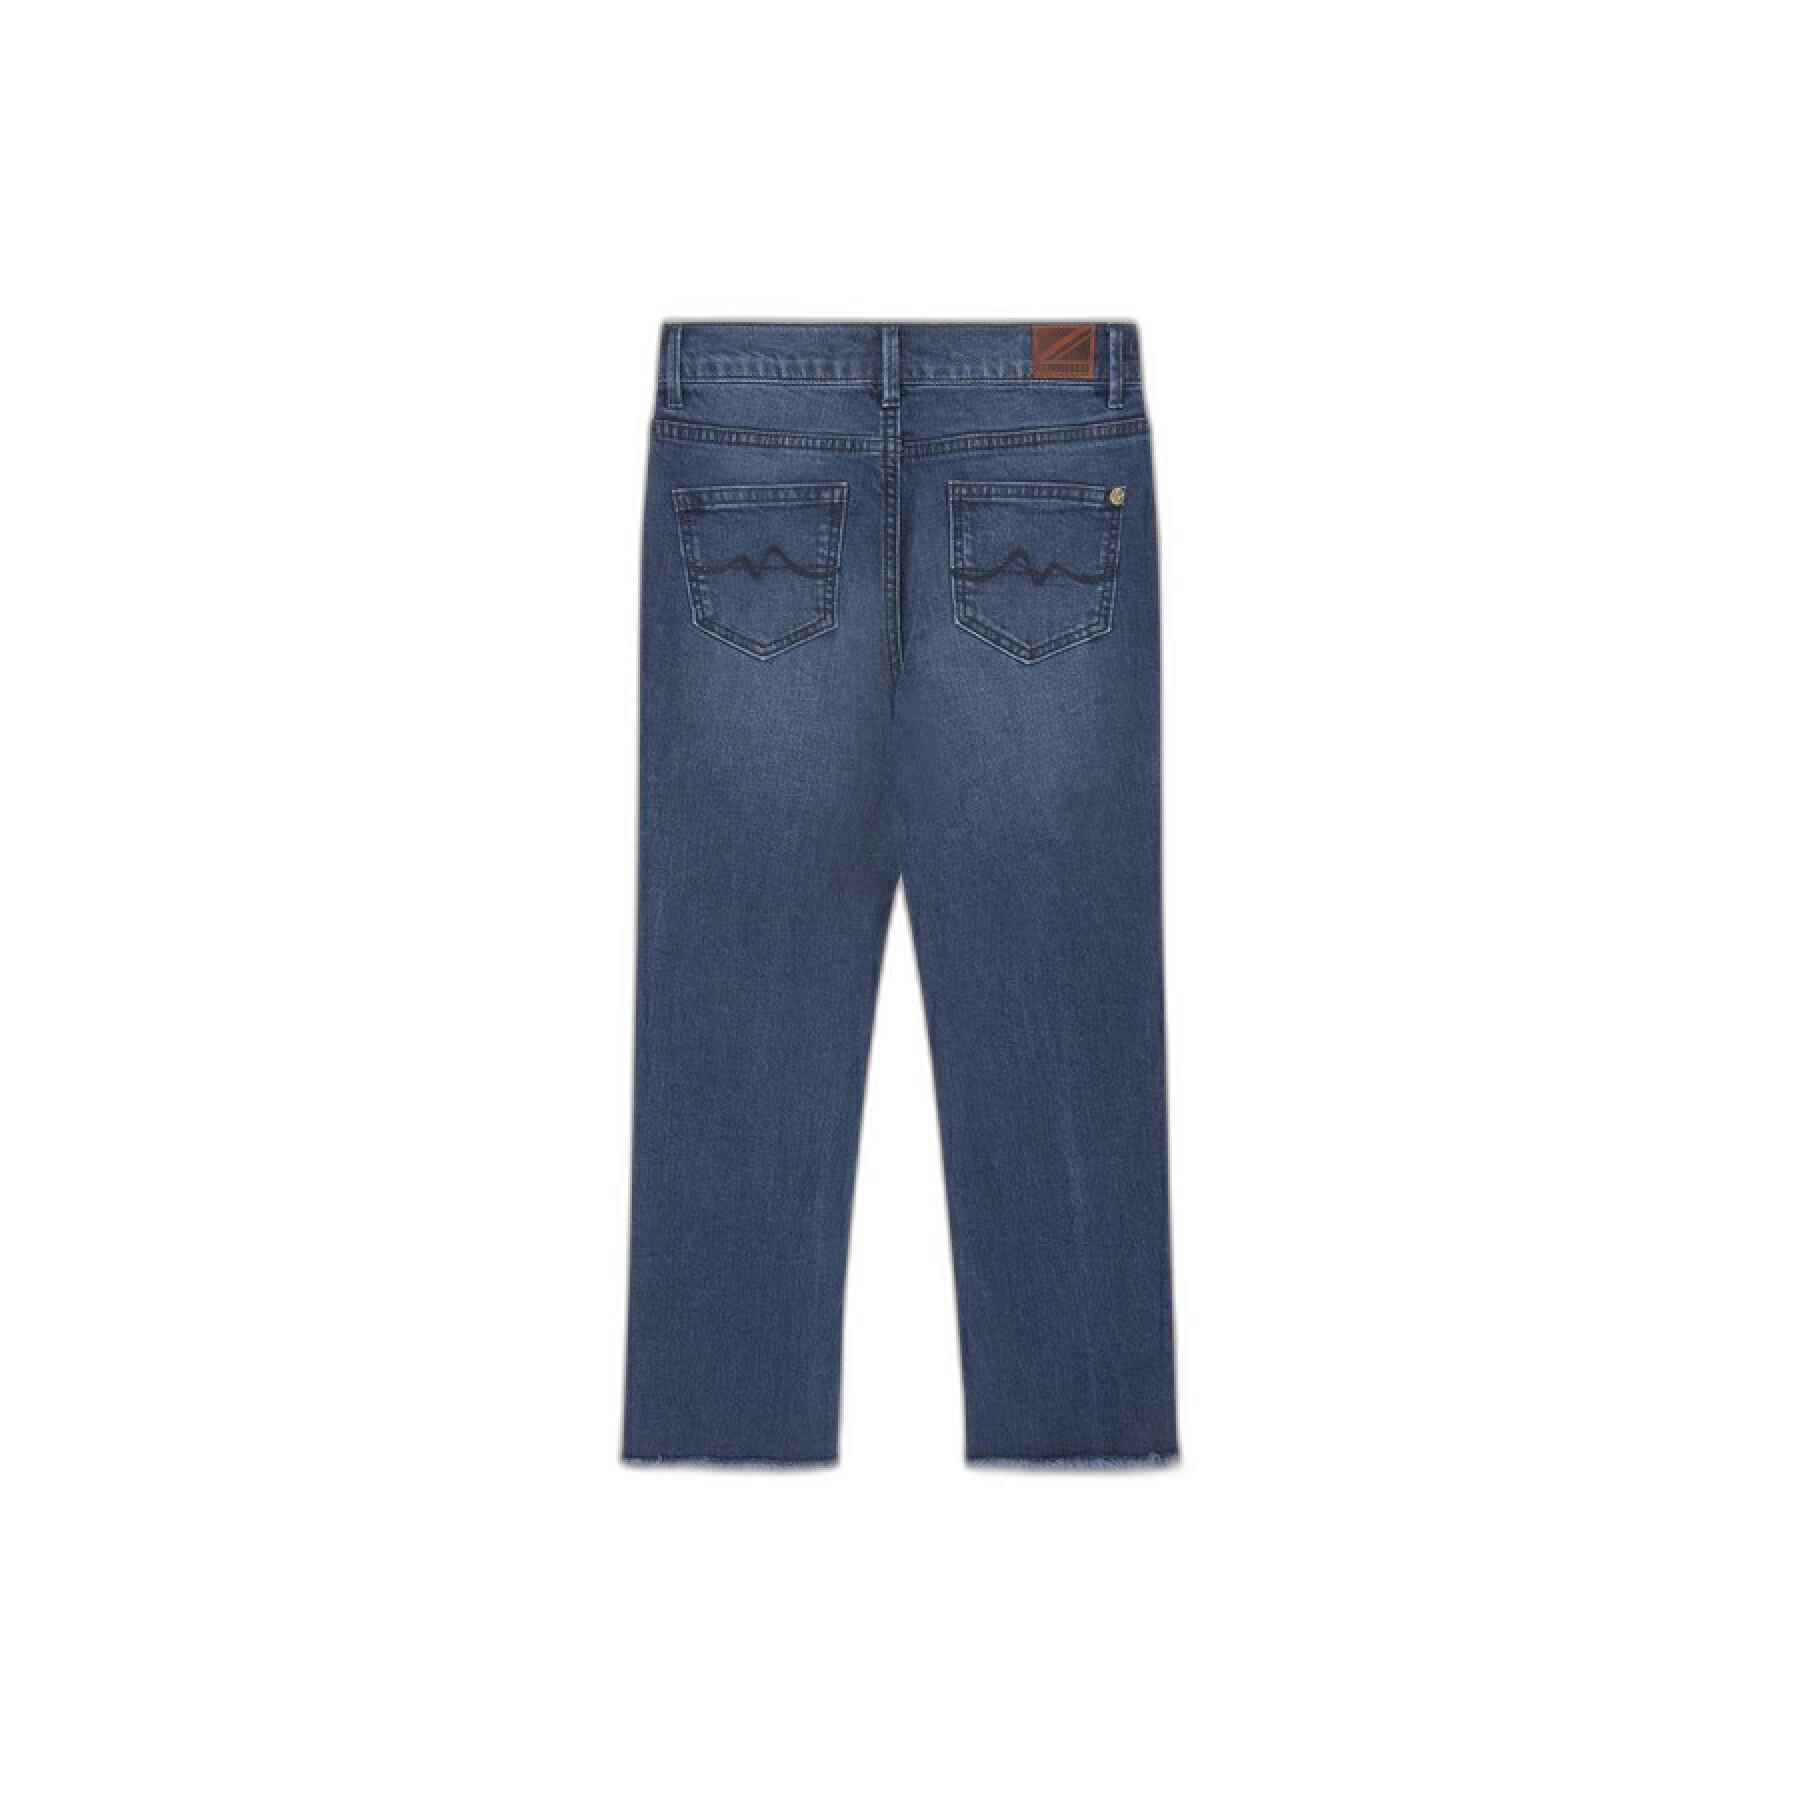 Mädchen-Jeans Pepe Jeans Kimberly Flare Authentic